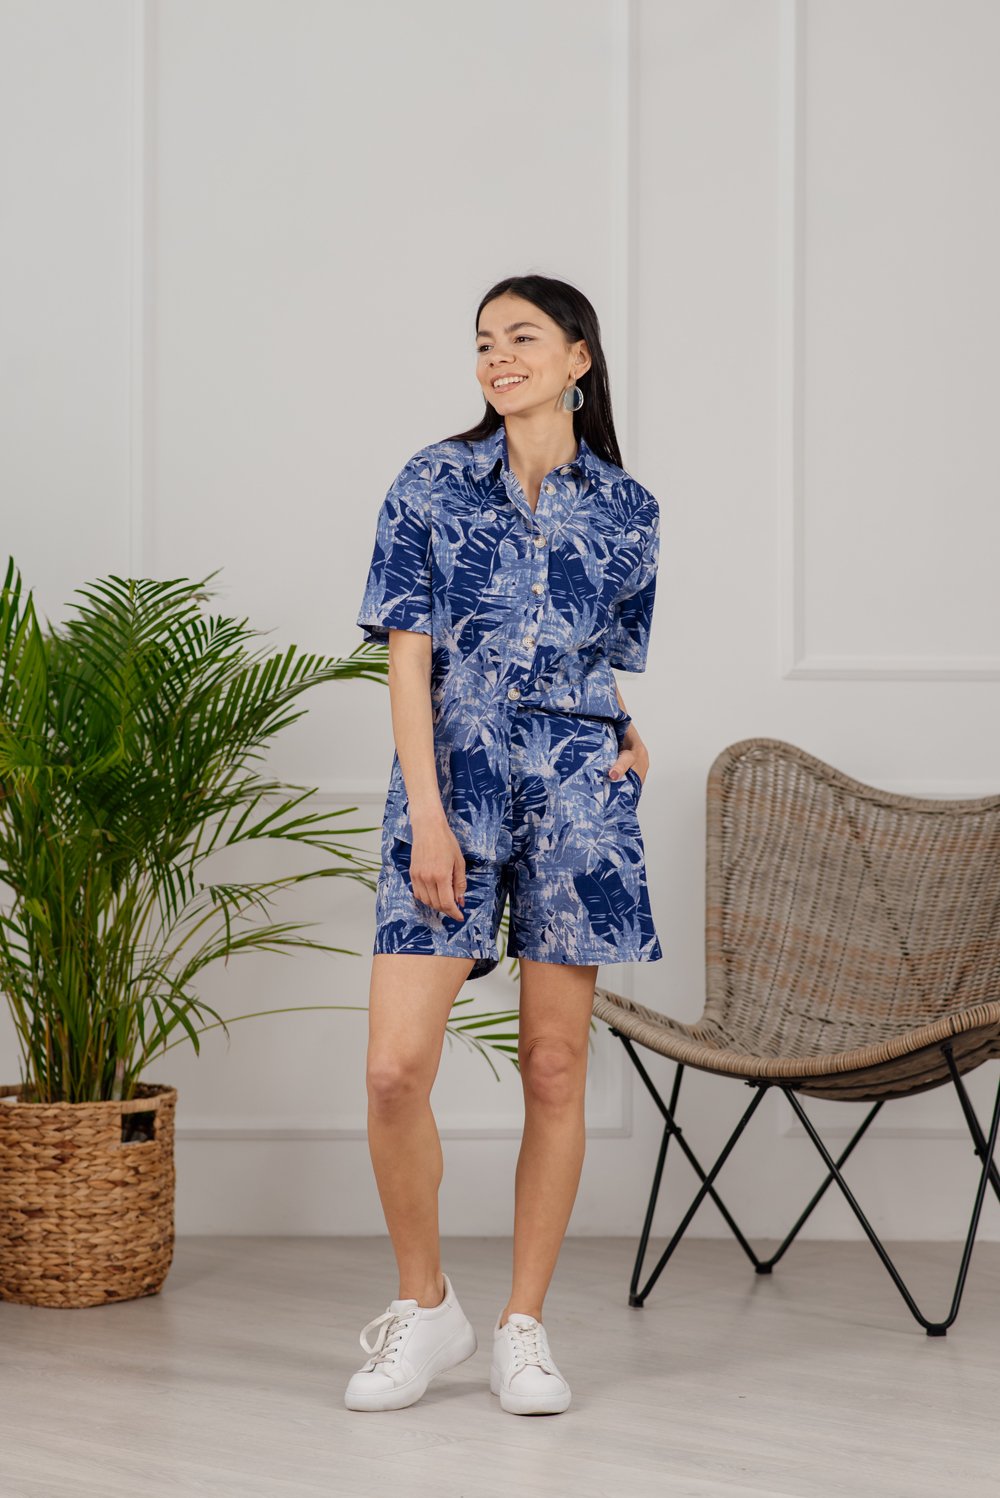 Linen suit with tropical print shorts